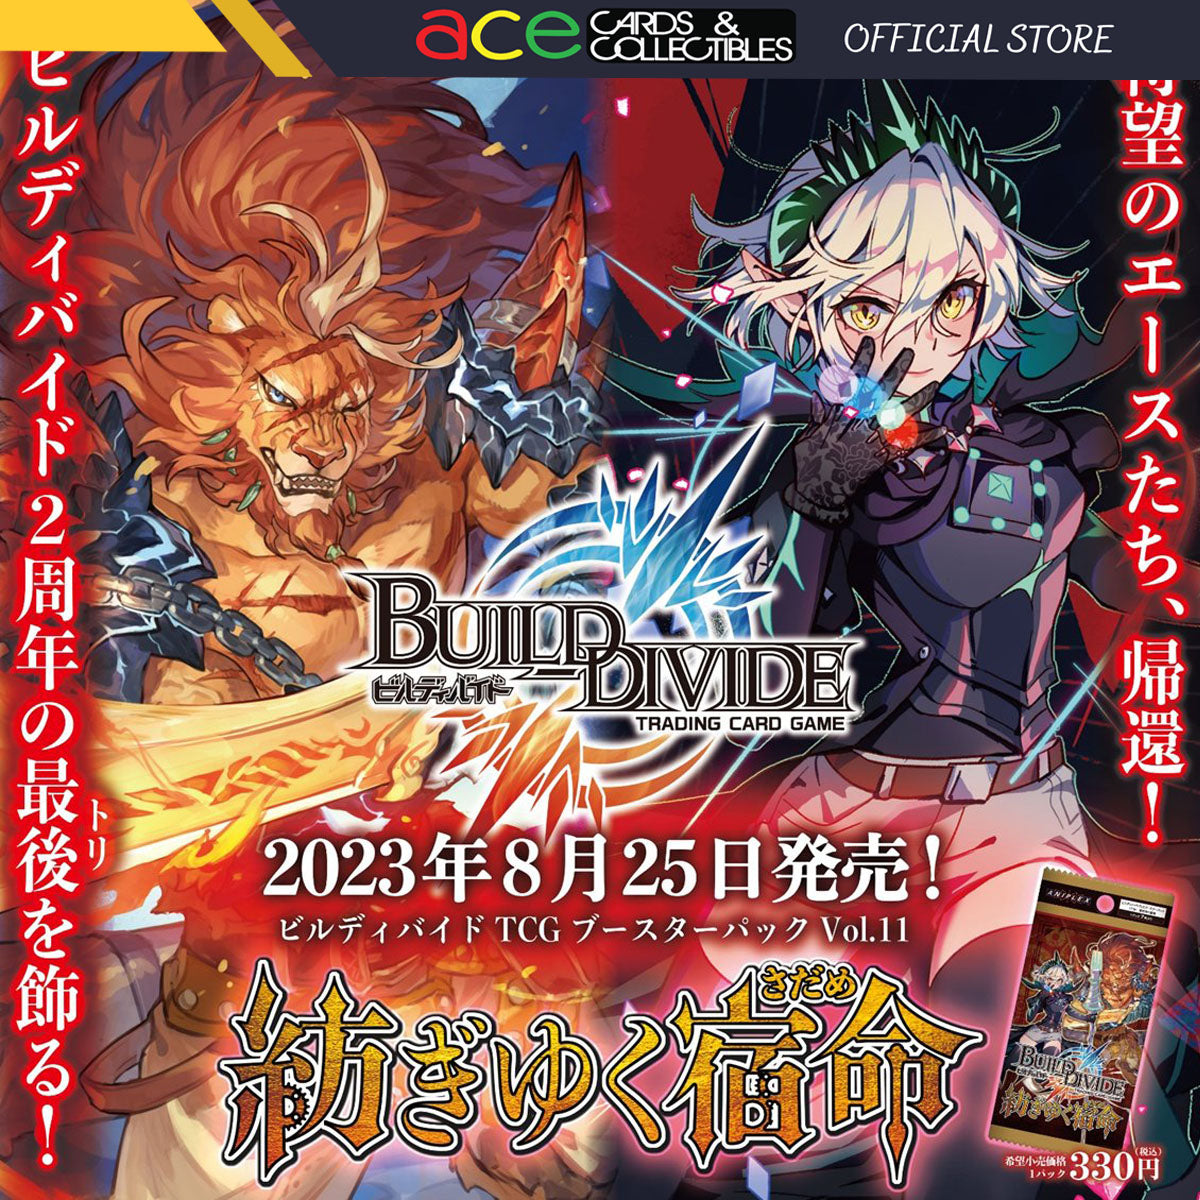 Build Divide Booster Box Vol. 11 "Spinning Fate" [BD-B-BT11] (Japanese)-Aniplex-Ace Cards & Collectibles